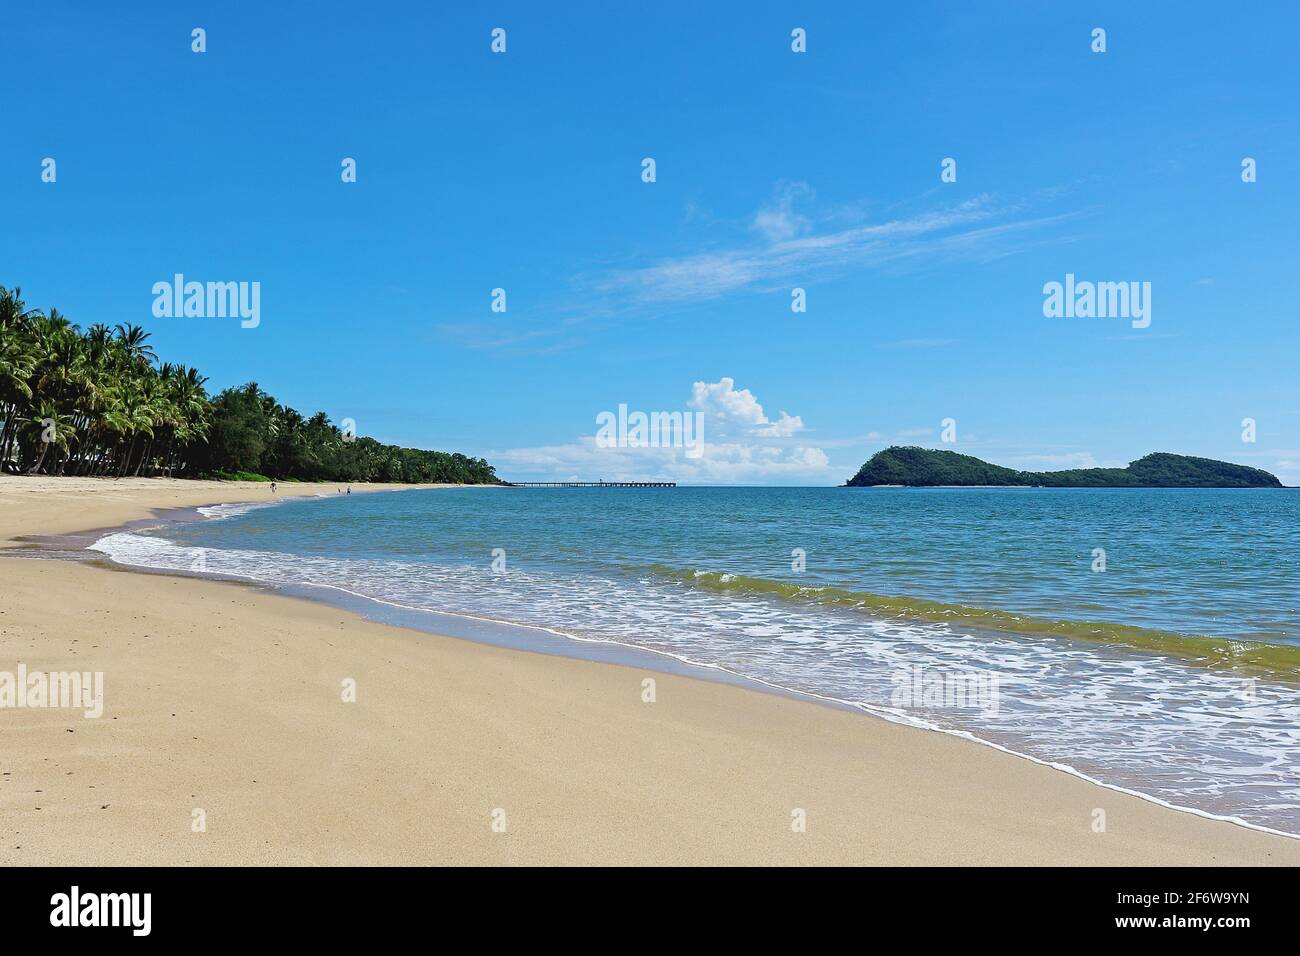 Another day in paradise hi-res stock photography and images - Alamy